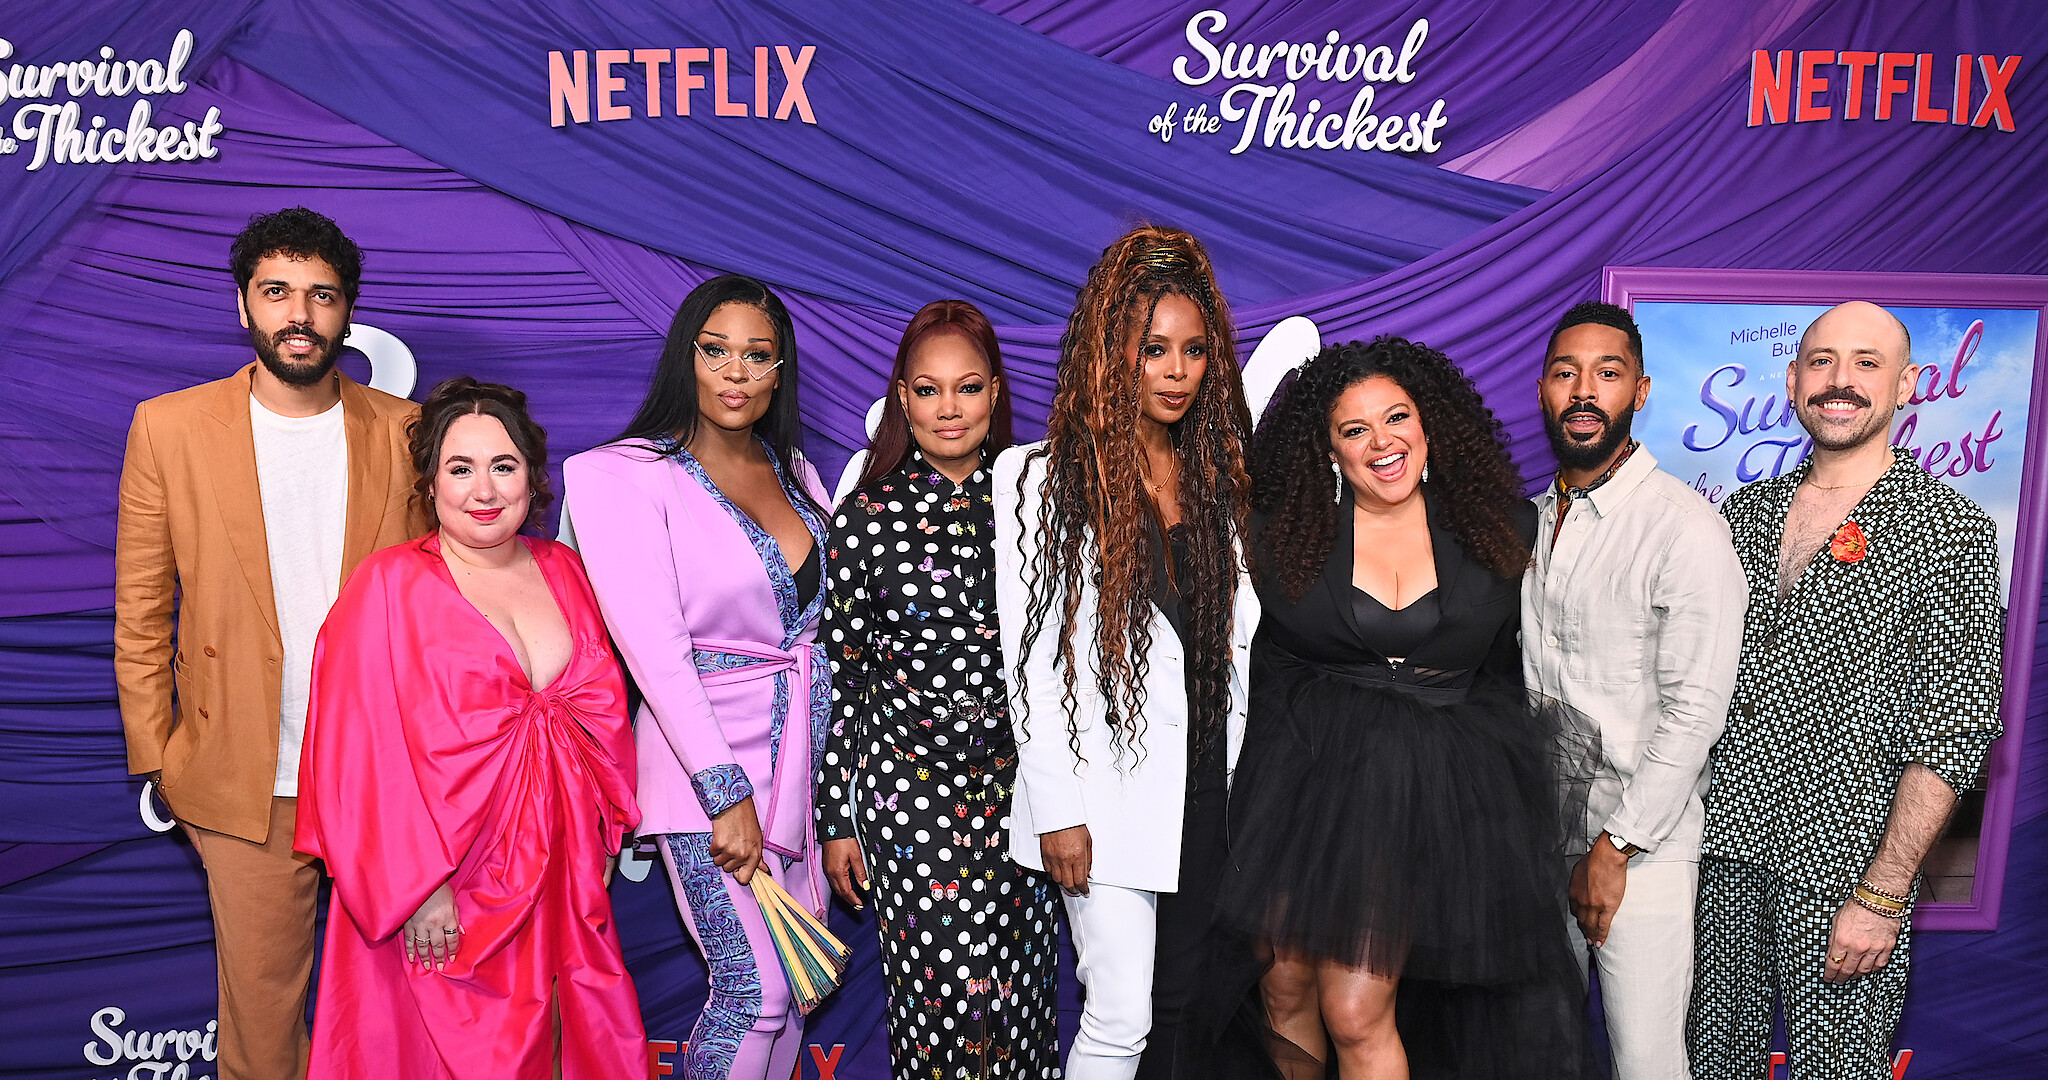 Survival Of The Thickest (Netflix) Outfits, Fashion